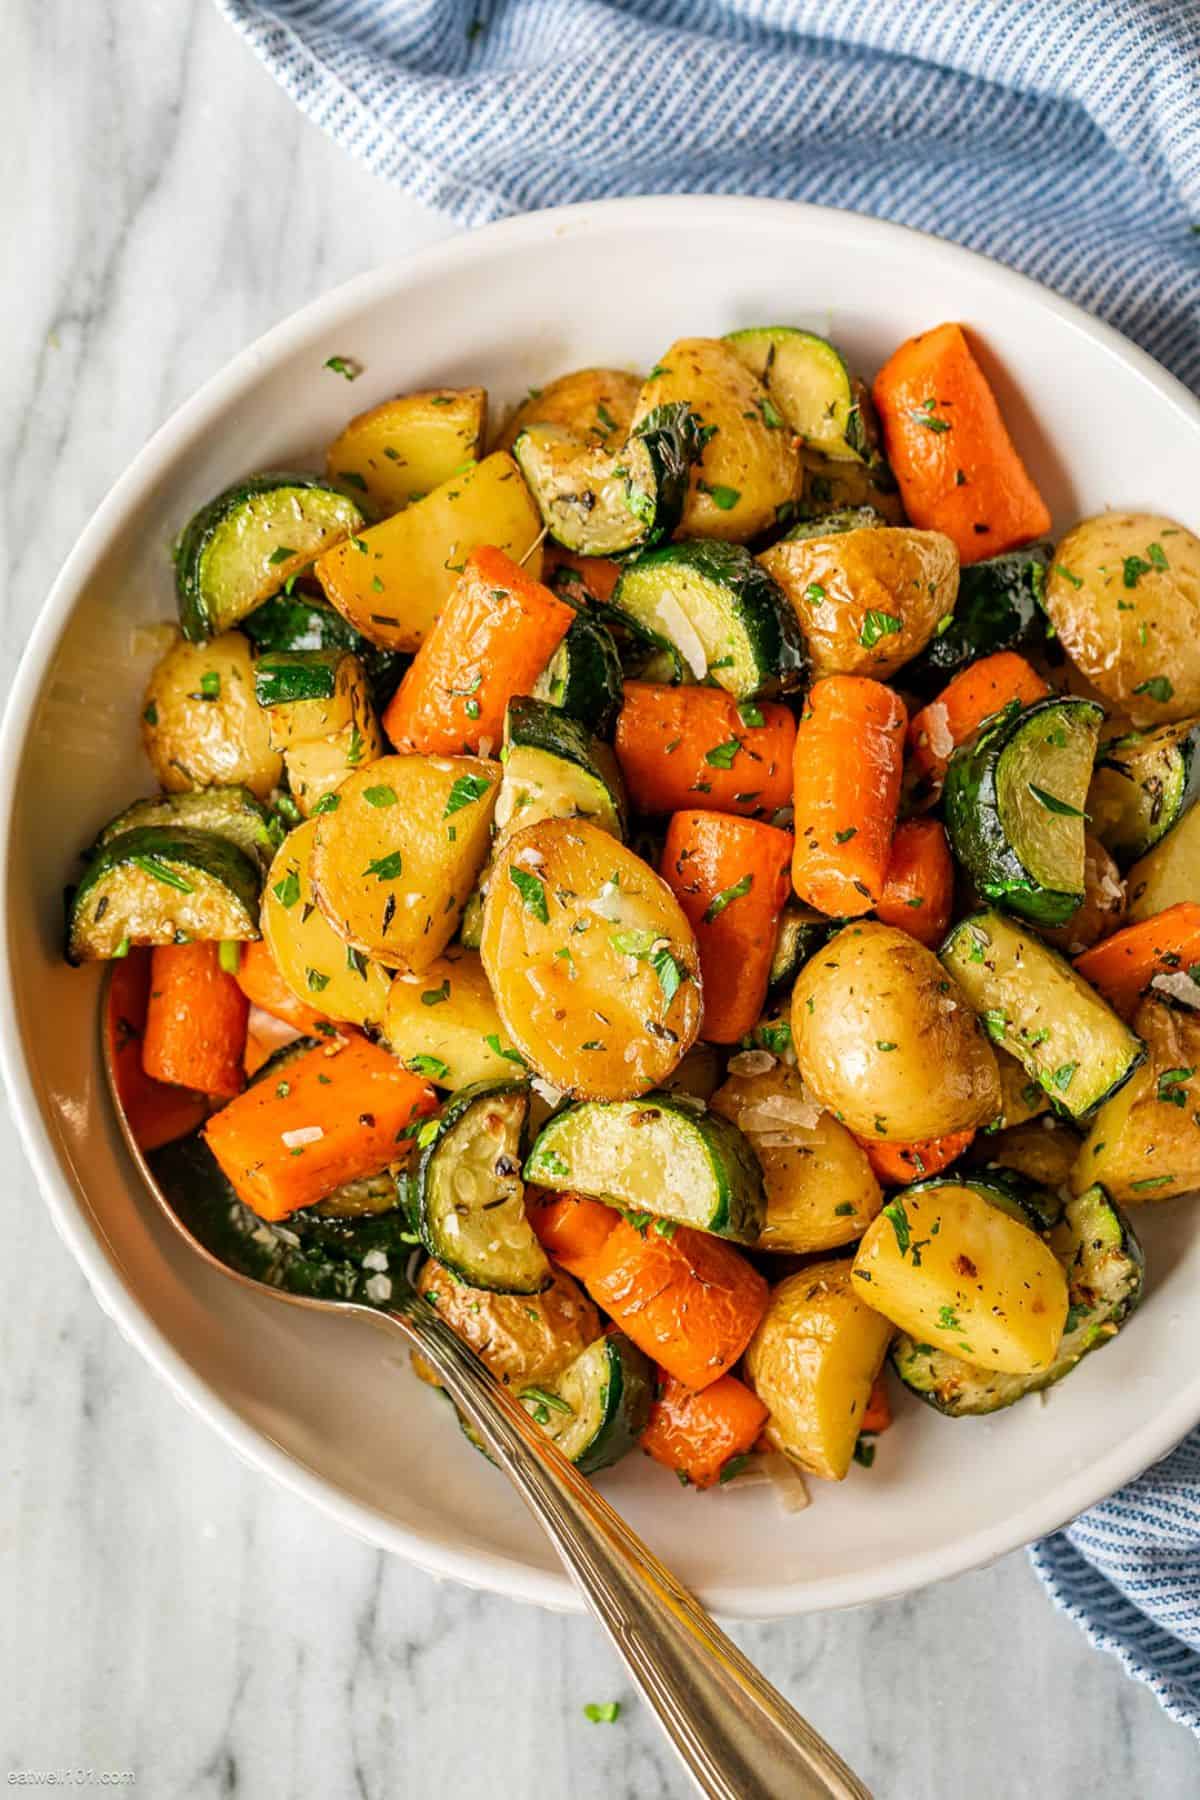 Delicious Garlic Herb Roasted Potatoes, Carrots, and Zucchini in a white bowl with a spoon.